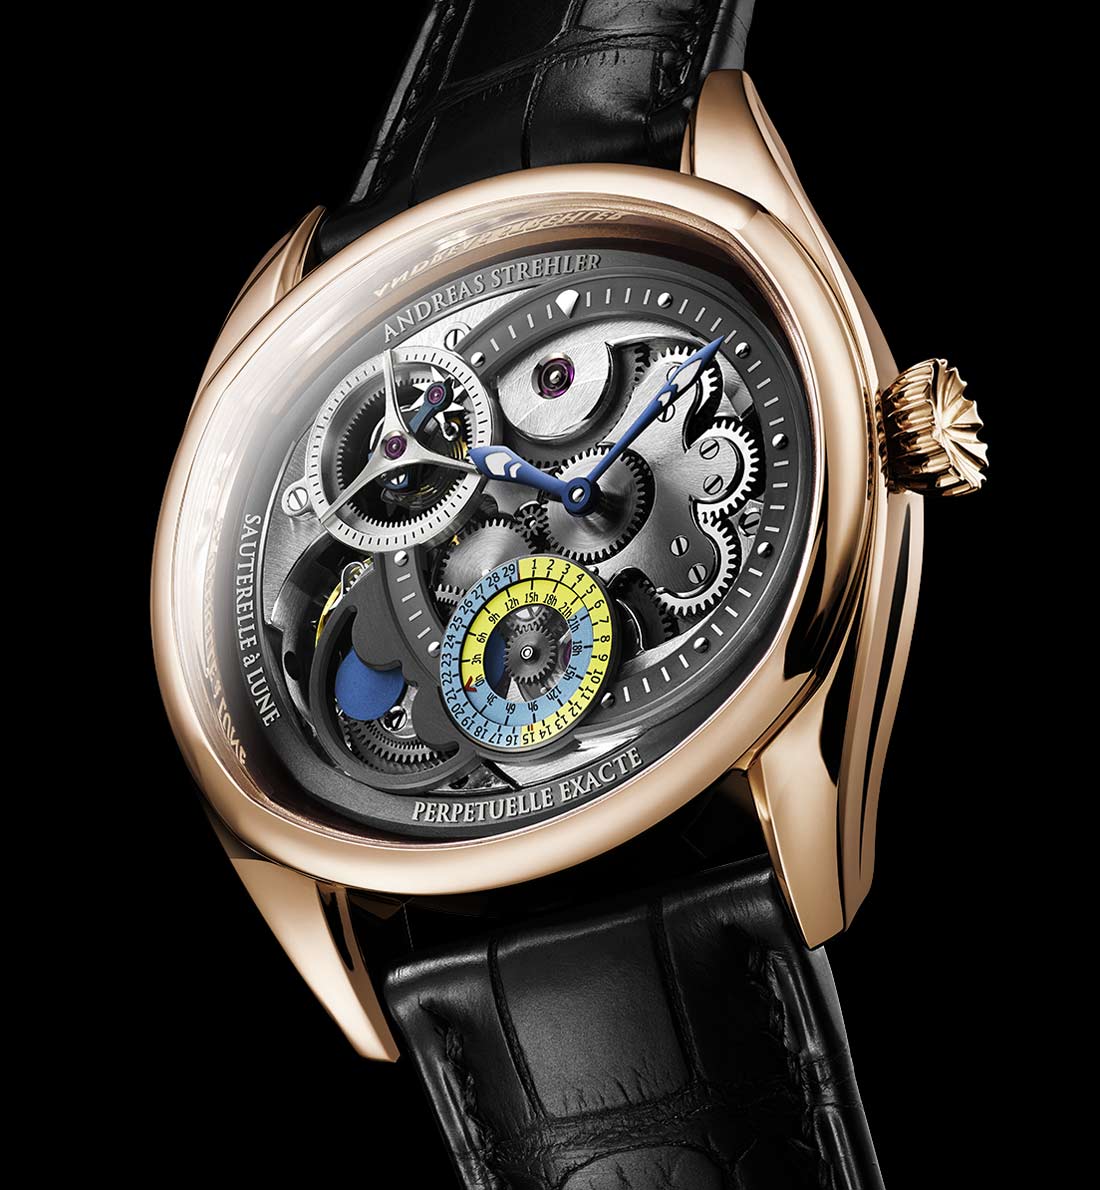 Andreas Strehler - Lune Exacte | Time and Watches